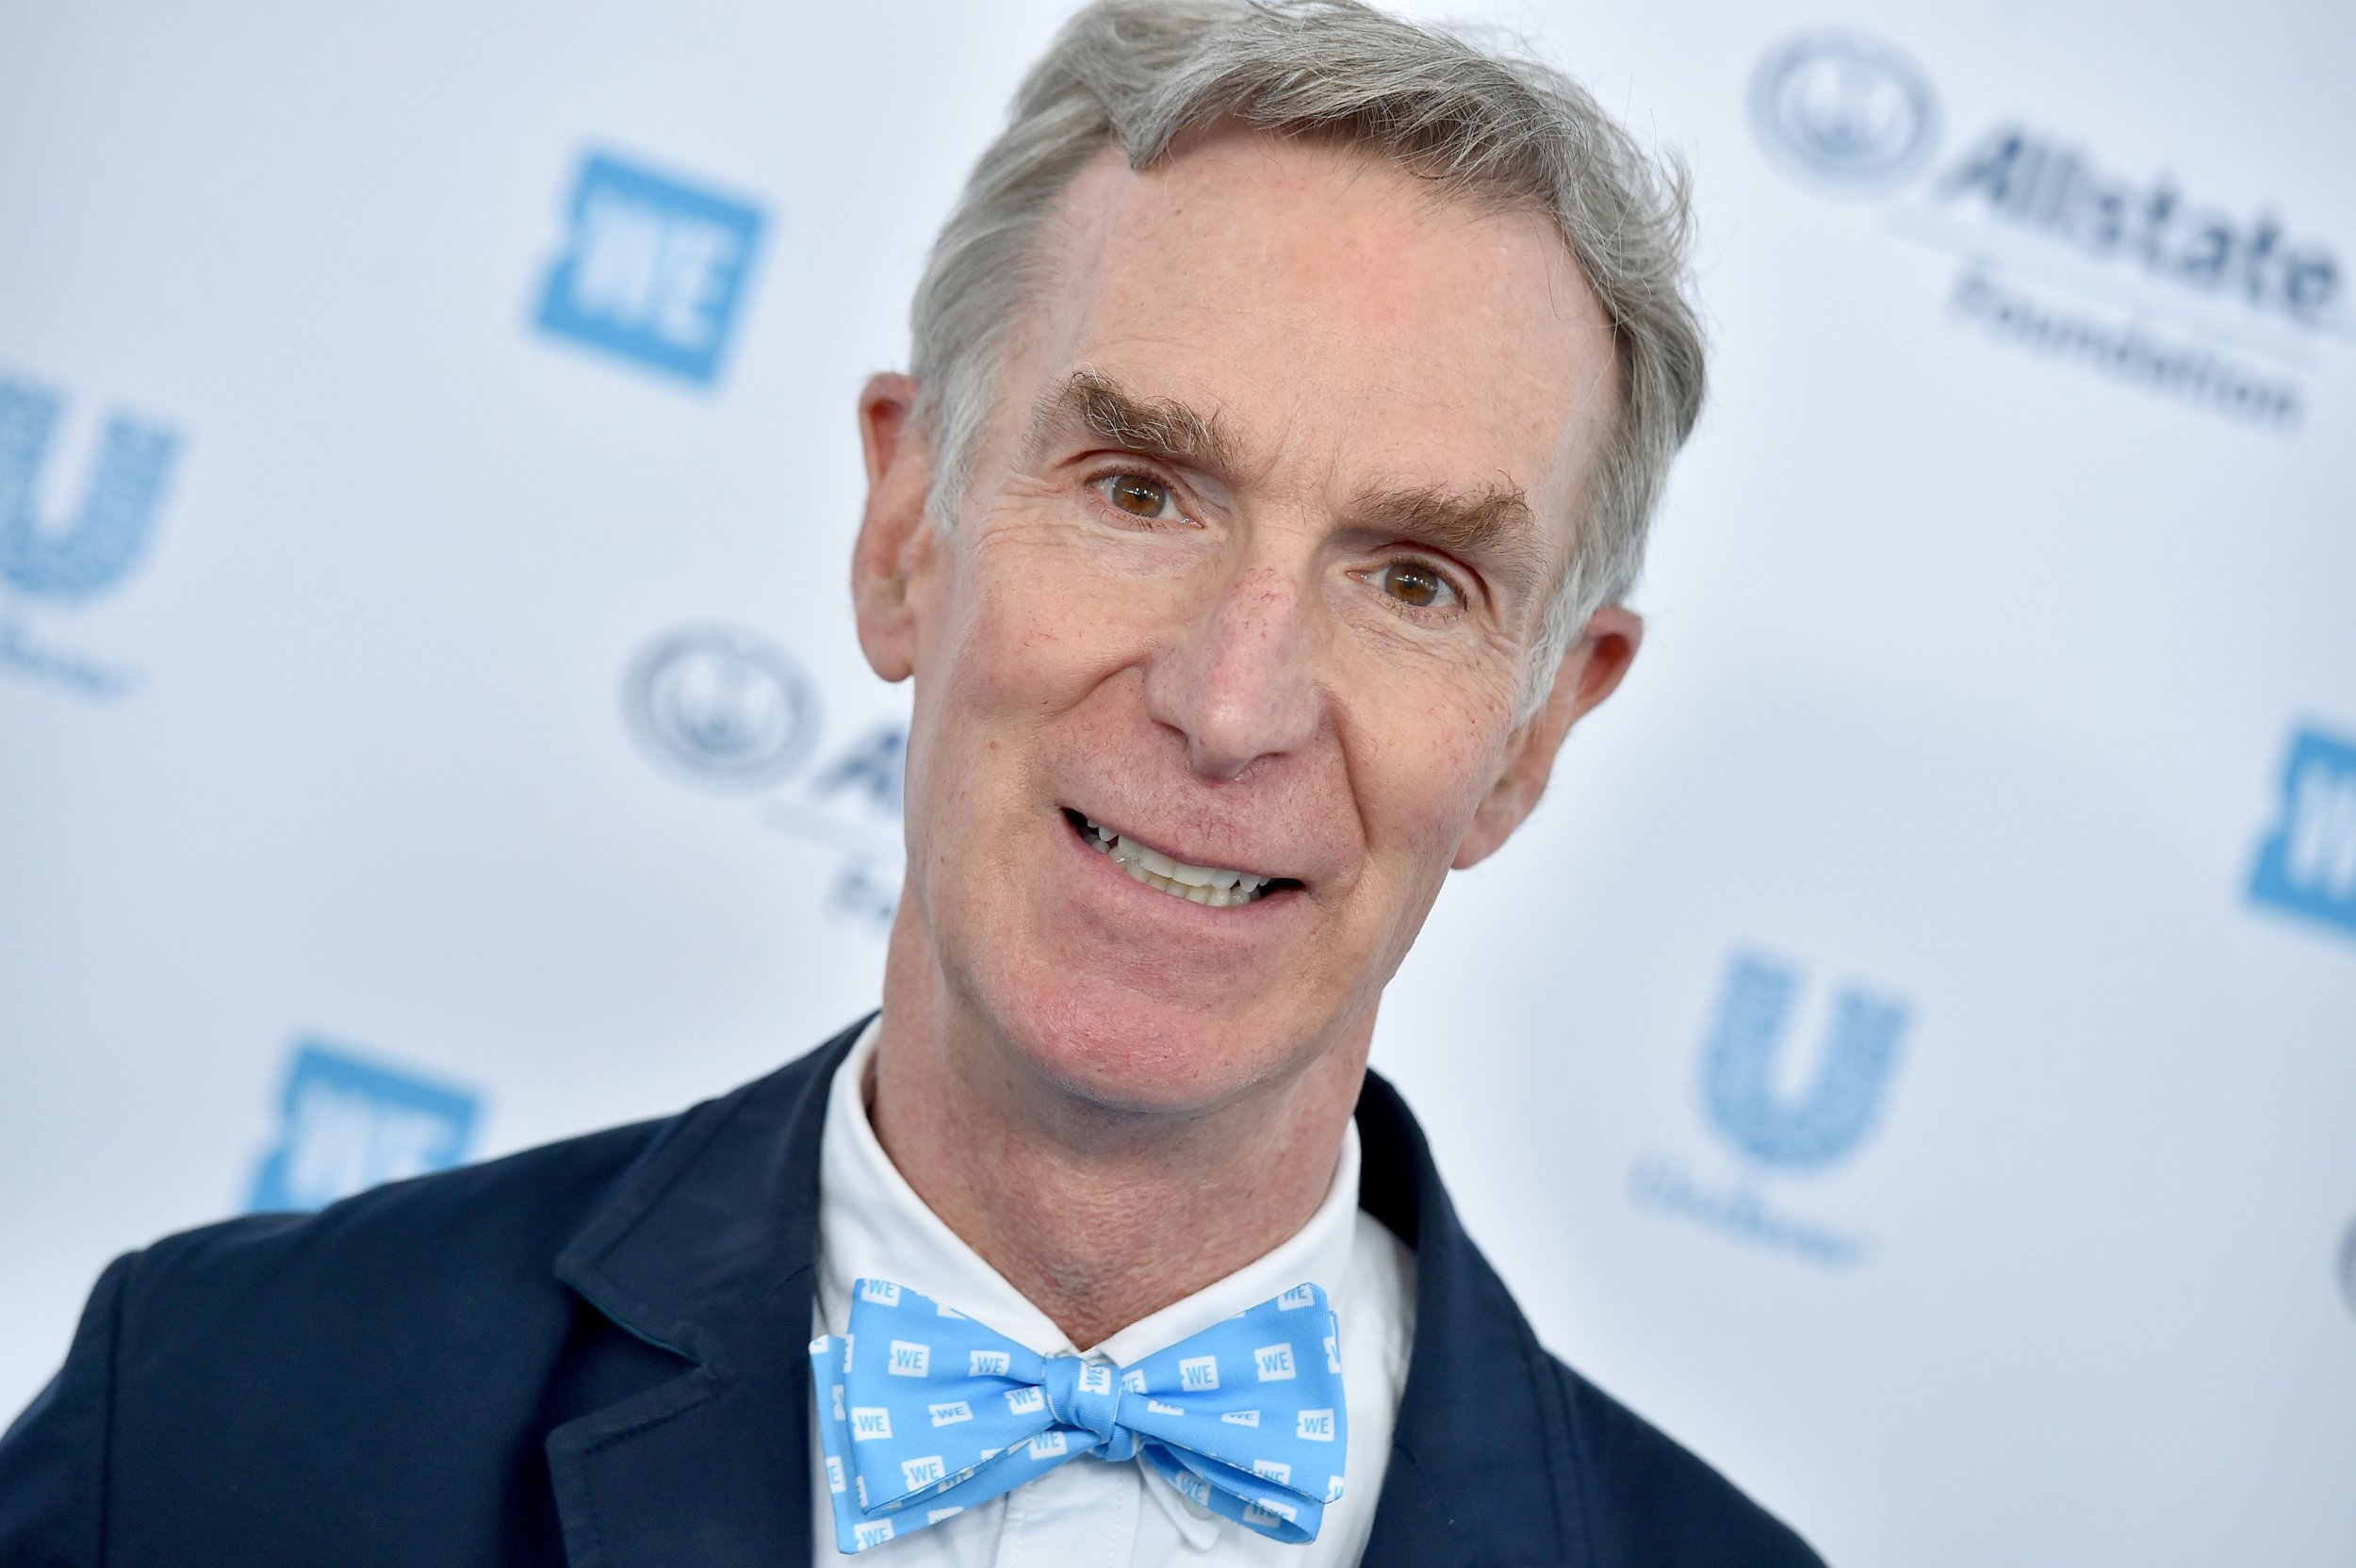 bill-nye-explains-global-warming-to-adults-the-planet-is-on-f-ing-fire